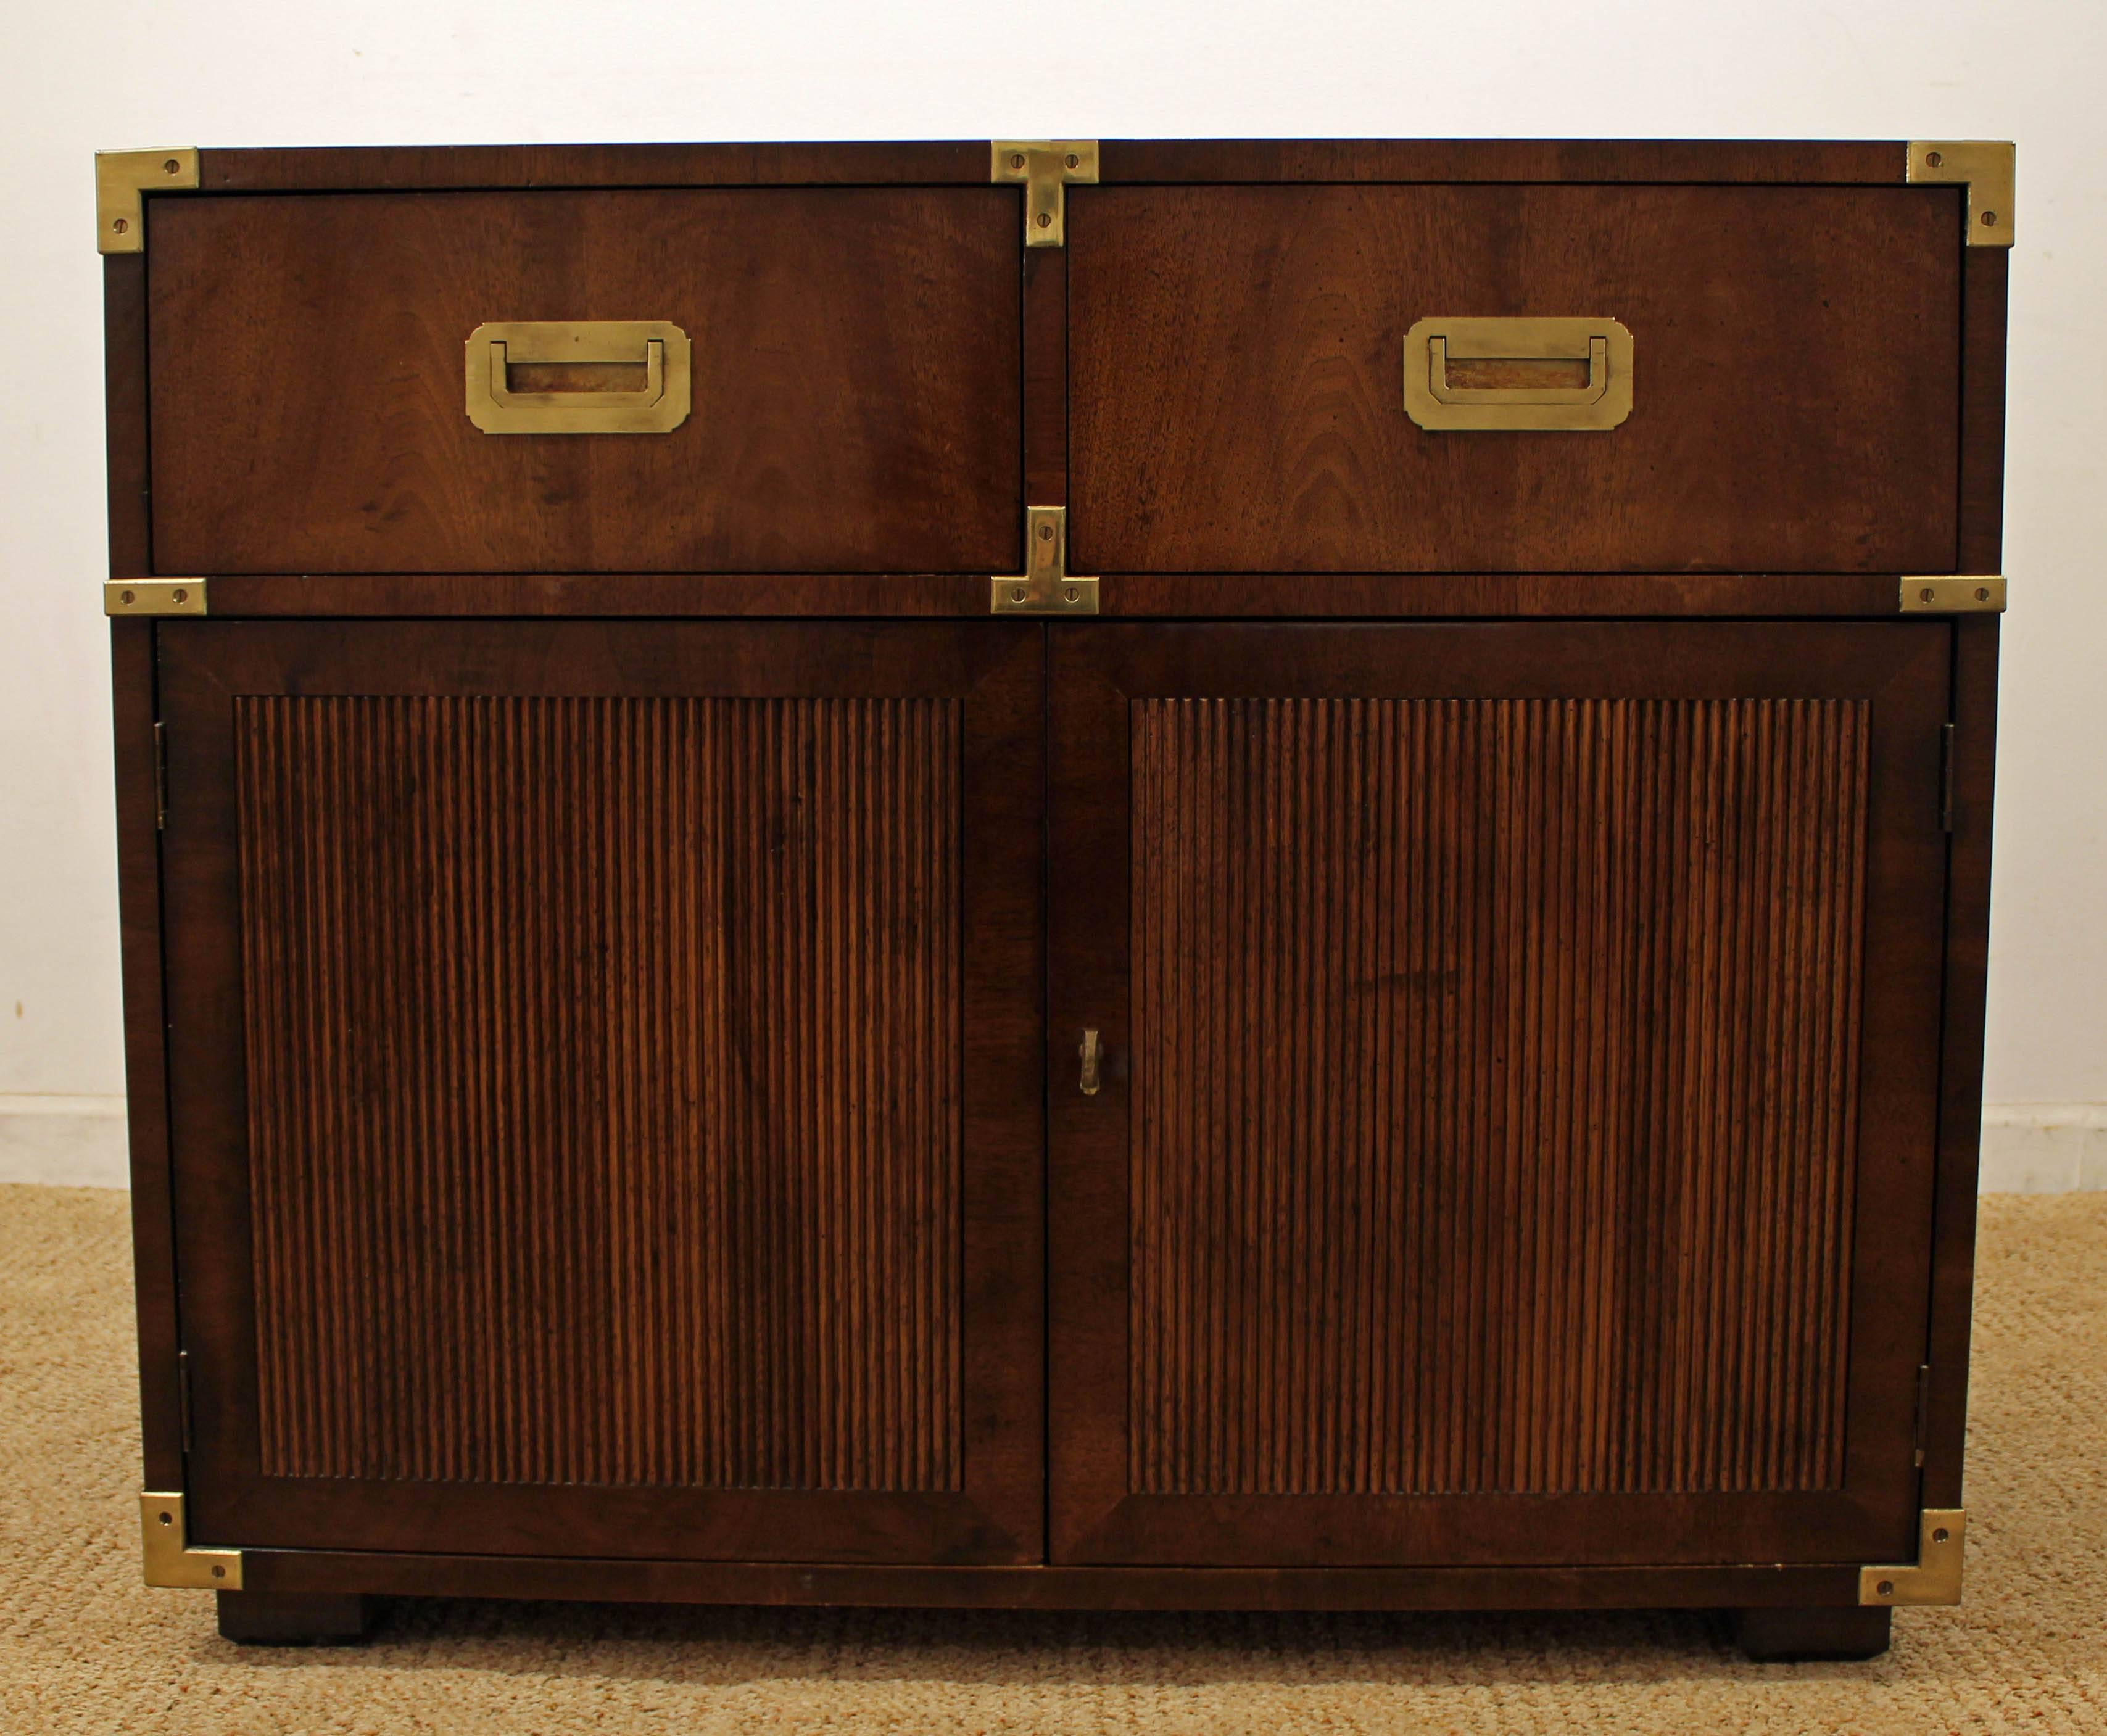 Offered is a great Campaign style made by Henredon, circa 1970s. Features two drawers with open storage (with shelf) below and brass hardware. It is in excellent condition showing minor age wear.

 Dimensions:
36